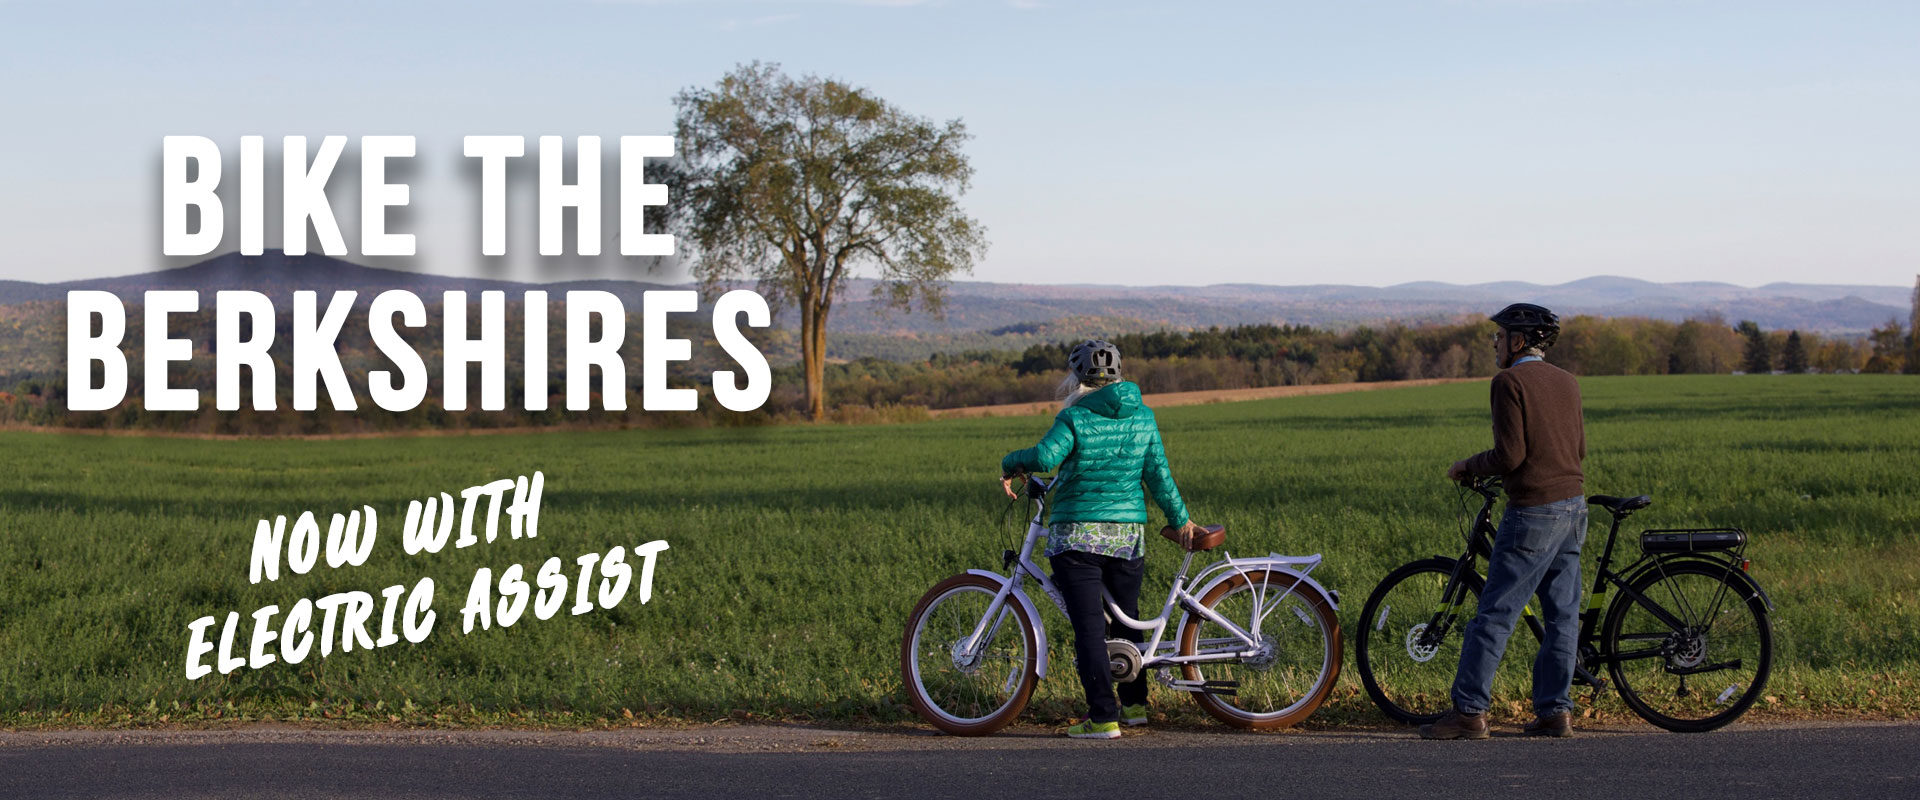 Bike the Berkshires | Now With Electric Assist